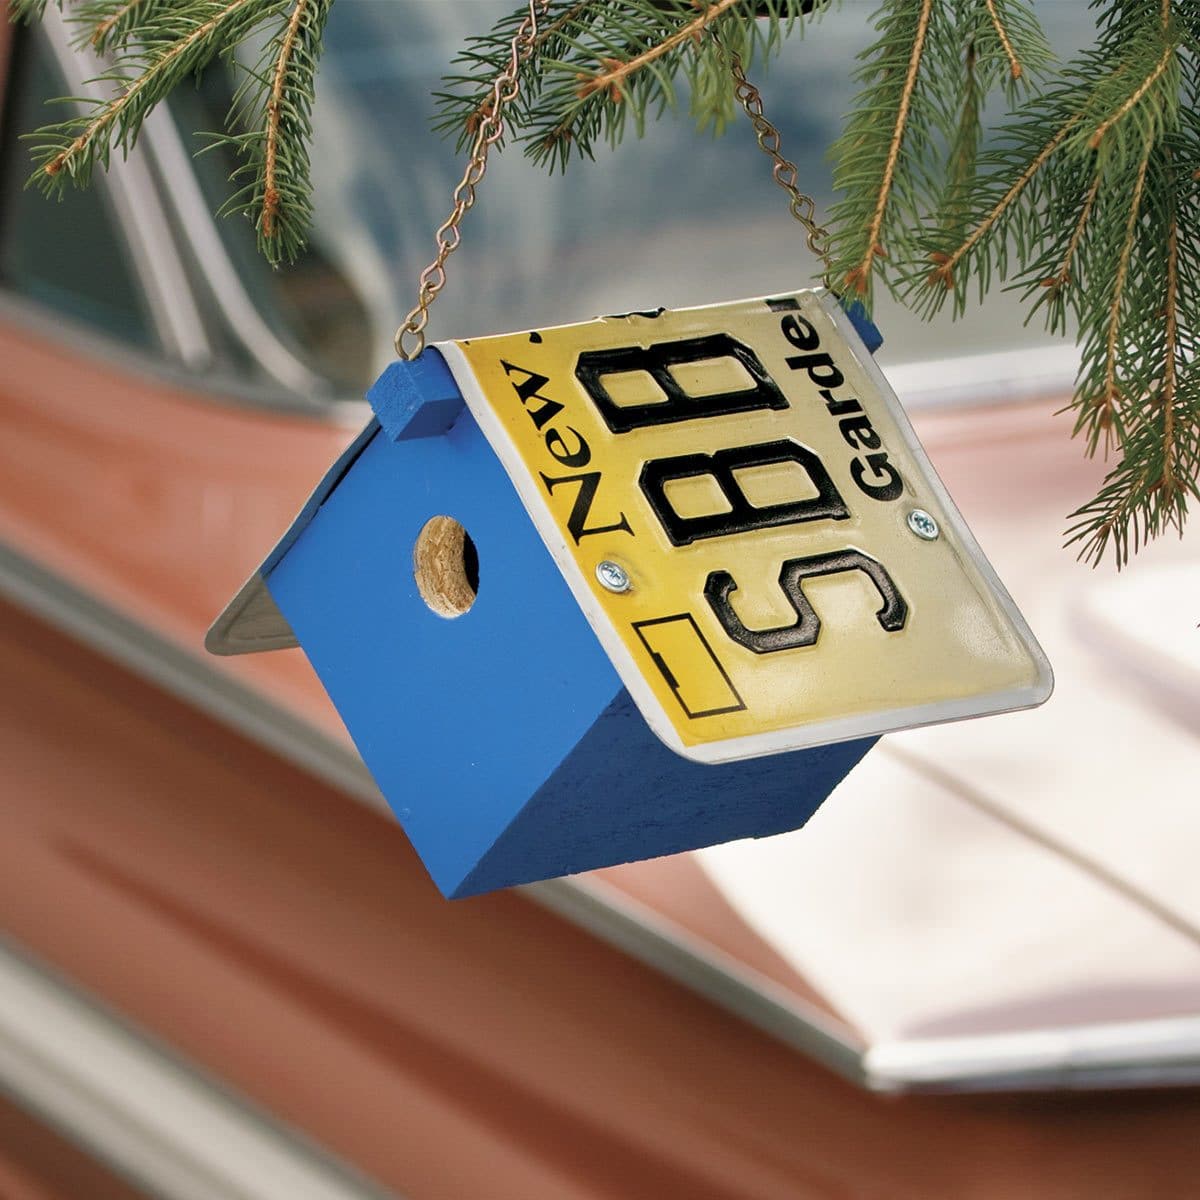 license plate birdhouse hanging on tree branch